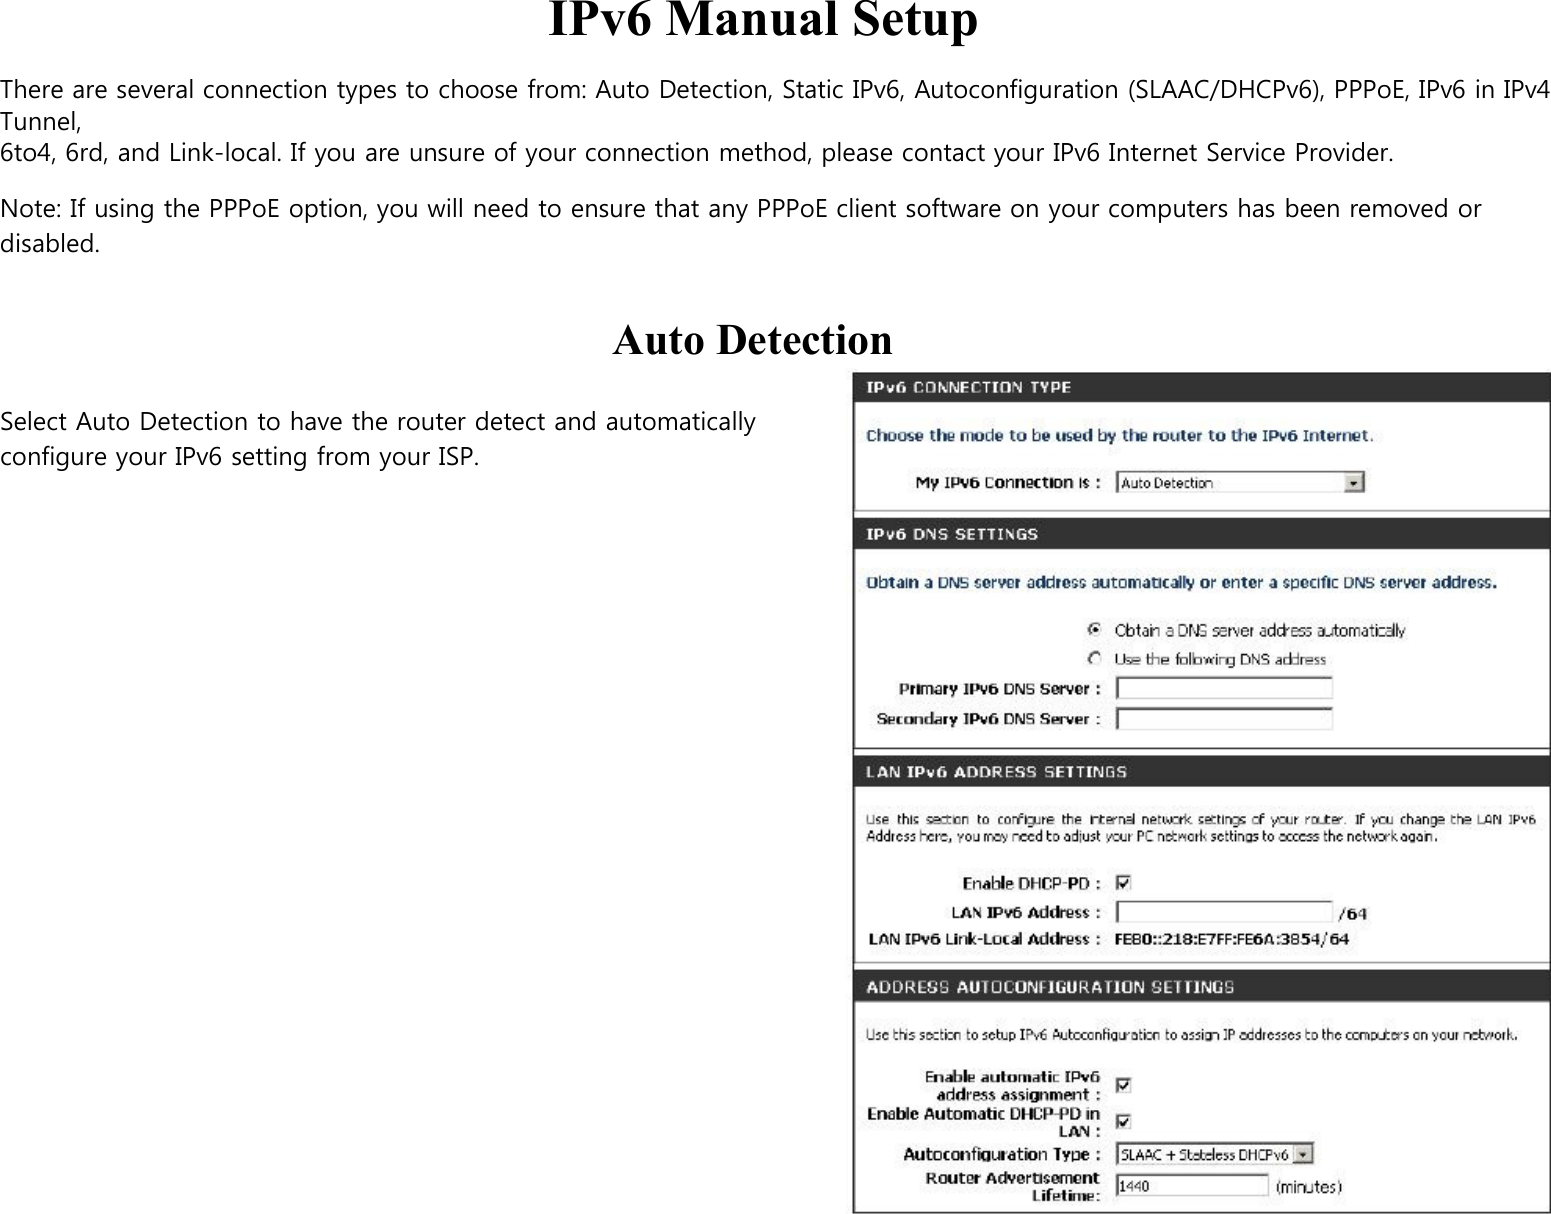  IPv6 Manual Setup  There are several connection types to choose from: Auto Detection, Static IPv6, Autoconfiguration (SLAAC/DHCPv6), PPPoE, IPv6 in IPv4 Tunnel, 6to4, 6rd, and Link-local. If you are unsure of your connection method, please contact your IPv6 Internet Service Provider.  Note: If using the PPPoE option, you will need to ensure that any PPPoE client software on your computers has been removed or disabled.   Auto Detection  Select Auto Detection to have the router detect and automatically   configure your IPv6 setting from your ISP. 